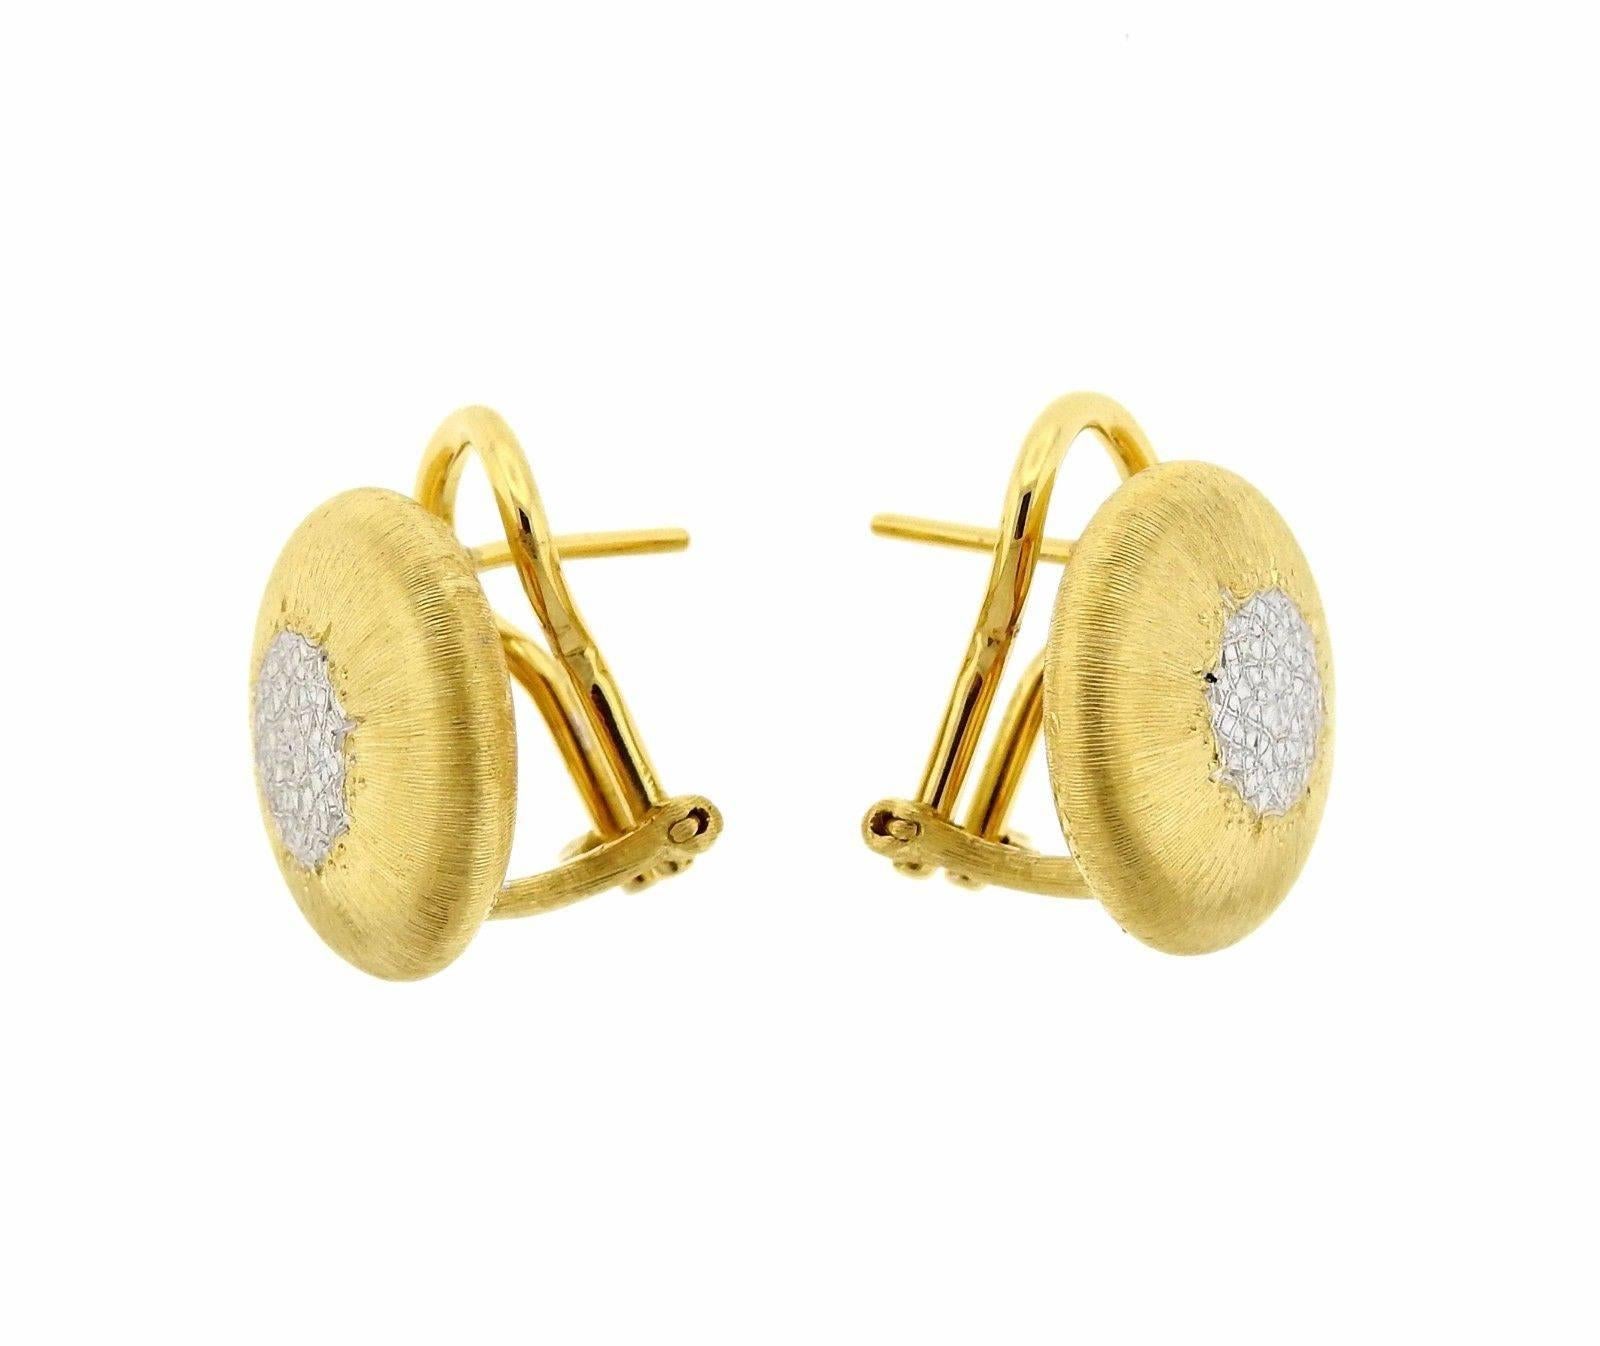 A pair of 18k yellow and white gold button earrings by Buccellati. Earrings measure 14.5mm in diameter and weigh 8.25 grams.  Marked: 18k, Italy, Buccellati. Retail current is $3640.